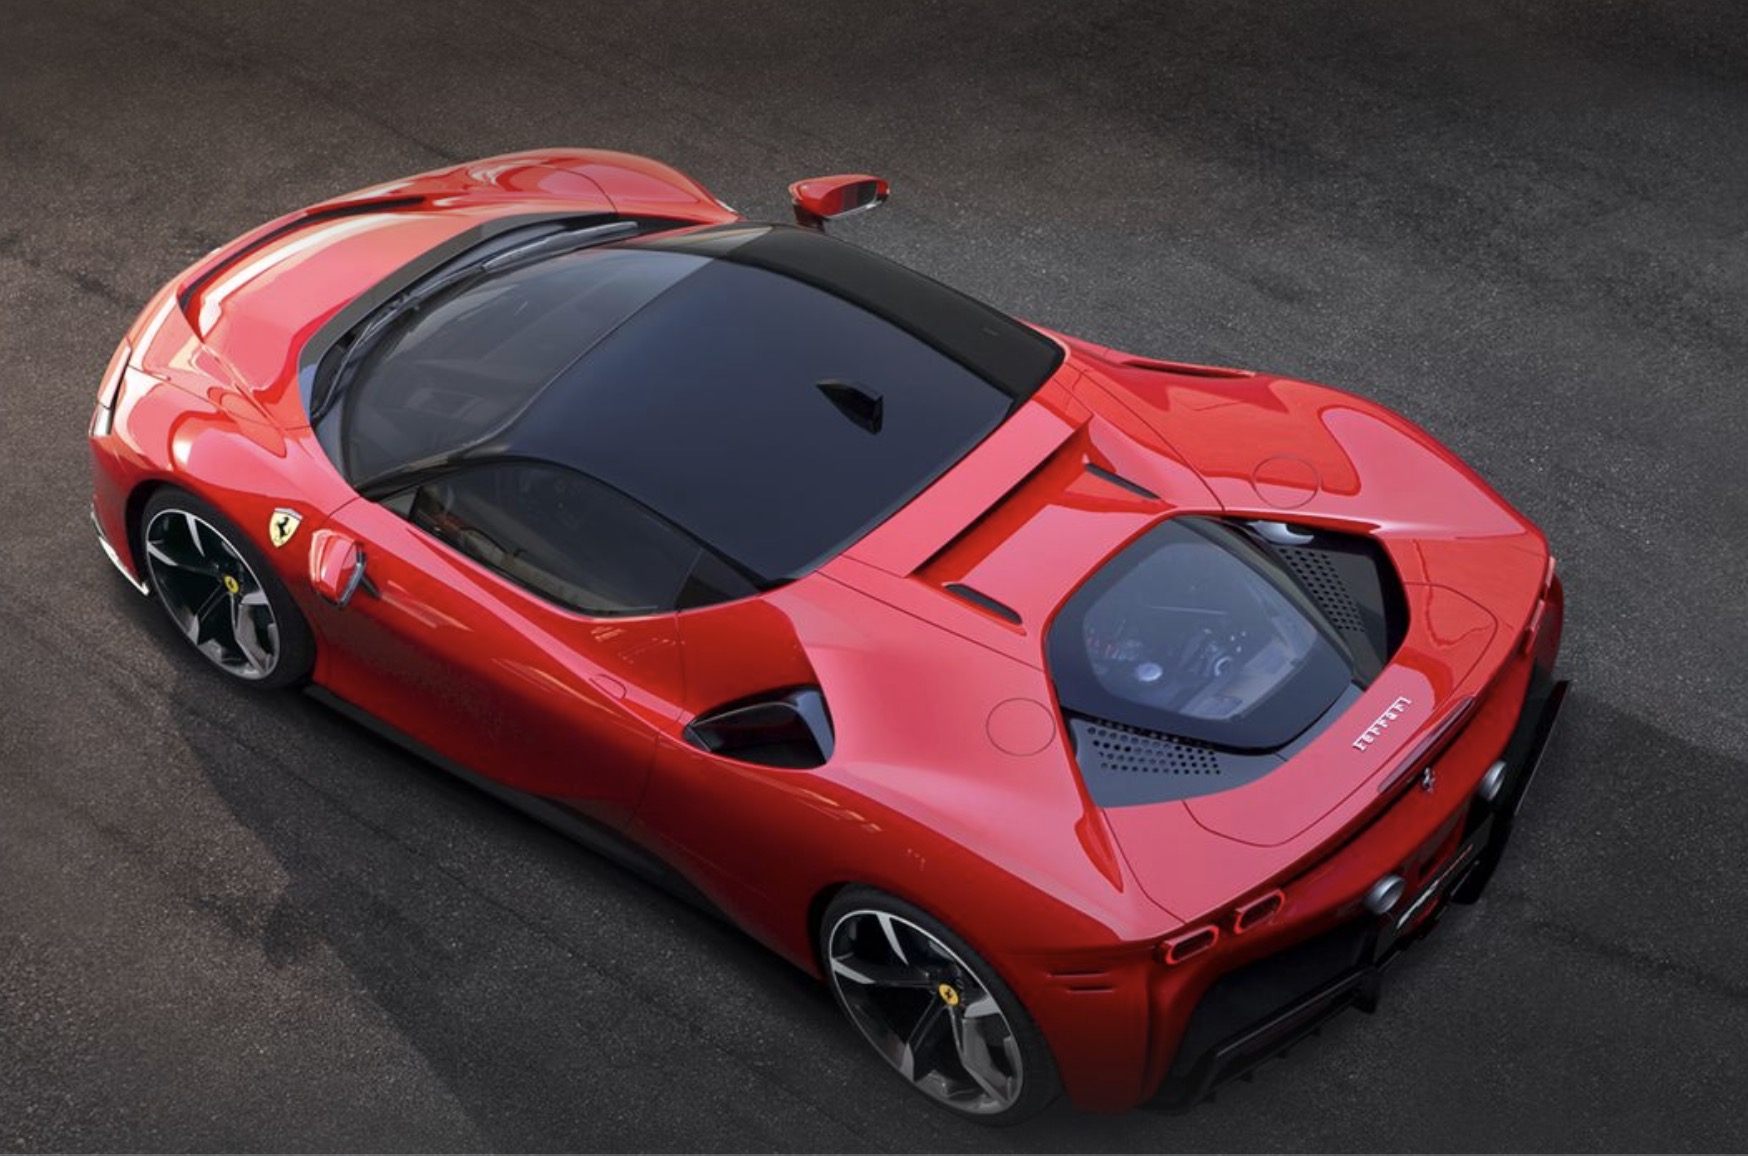 Ferrari will produce its first-ever SUV later this year, and launch its  first EV in 2025 | TechCrunch